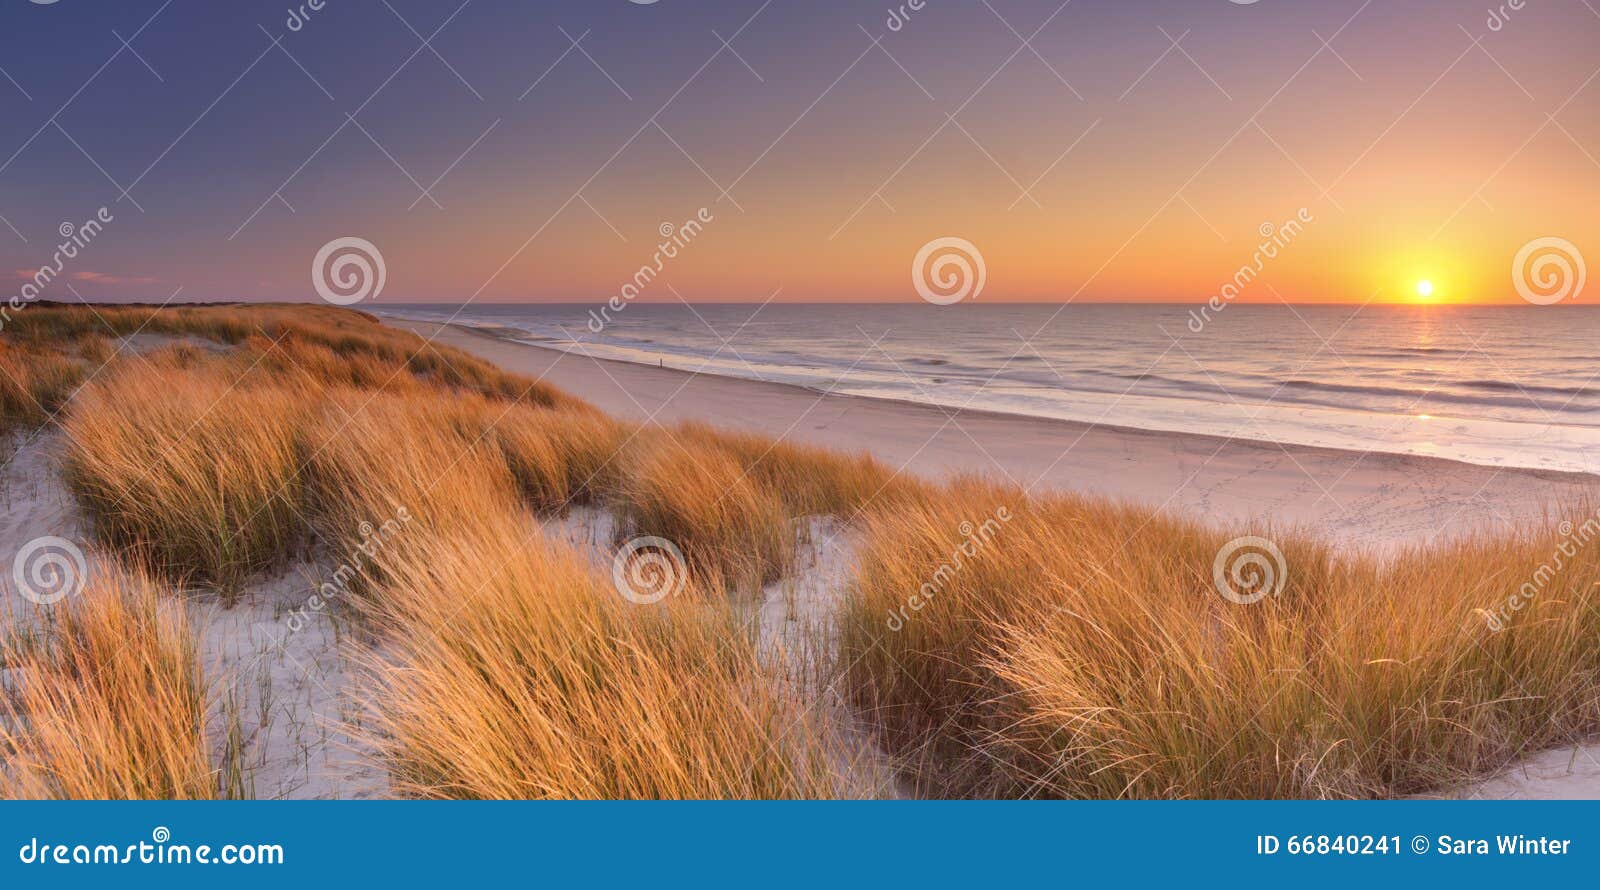 dunes and beach at sunset on texel island, the netherlands